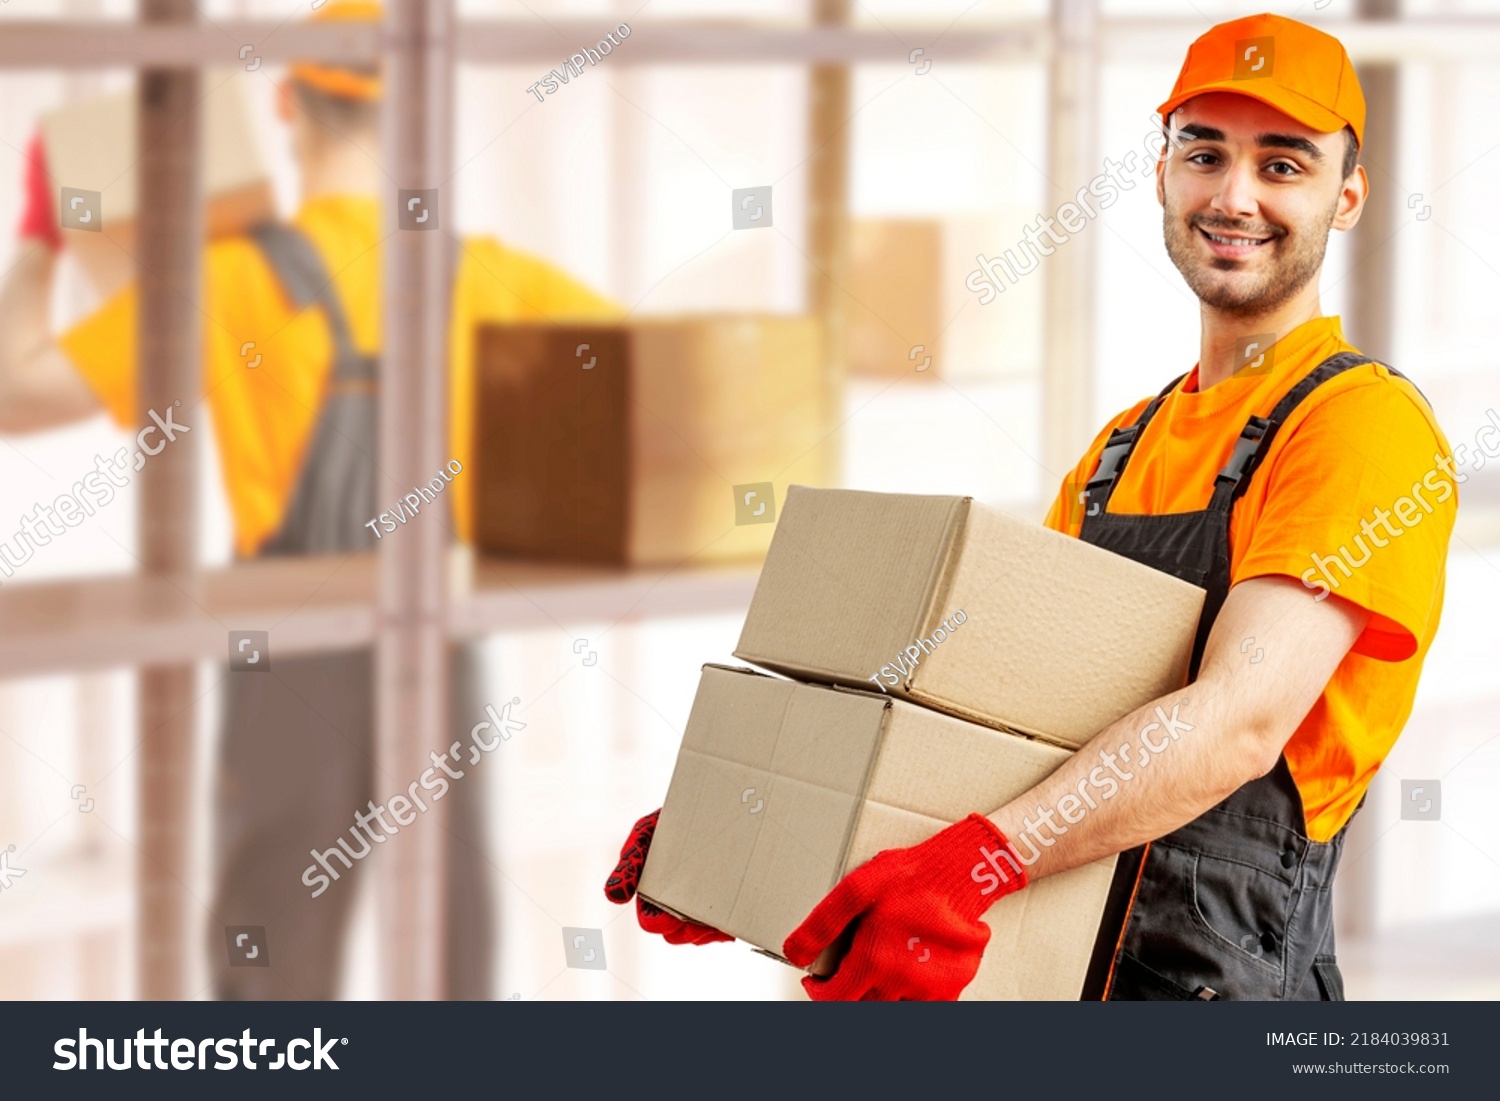 Young man holding cardboard package working in warehouse among racks and shelves. Delivery man with box. Staff laborer, orange uniform cap, t-shirt, coveralls service moving delivering orders goods.  #2184039831